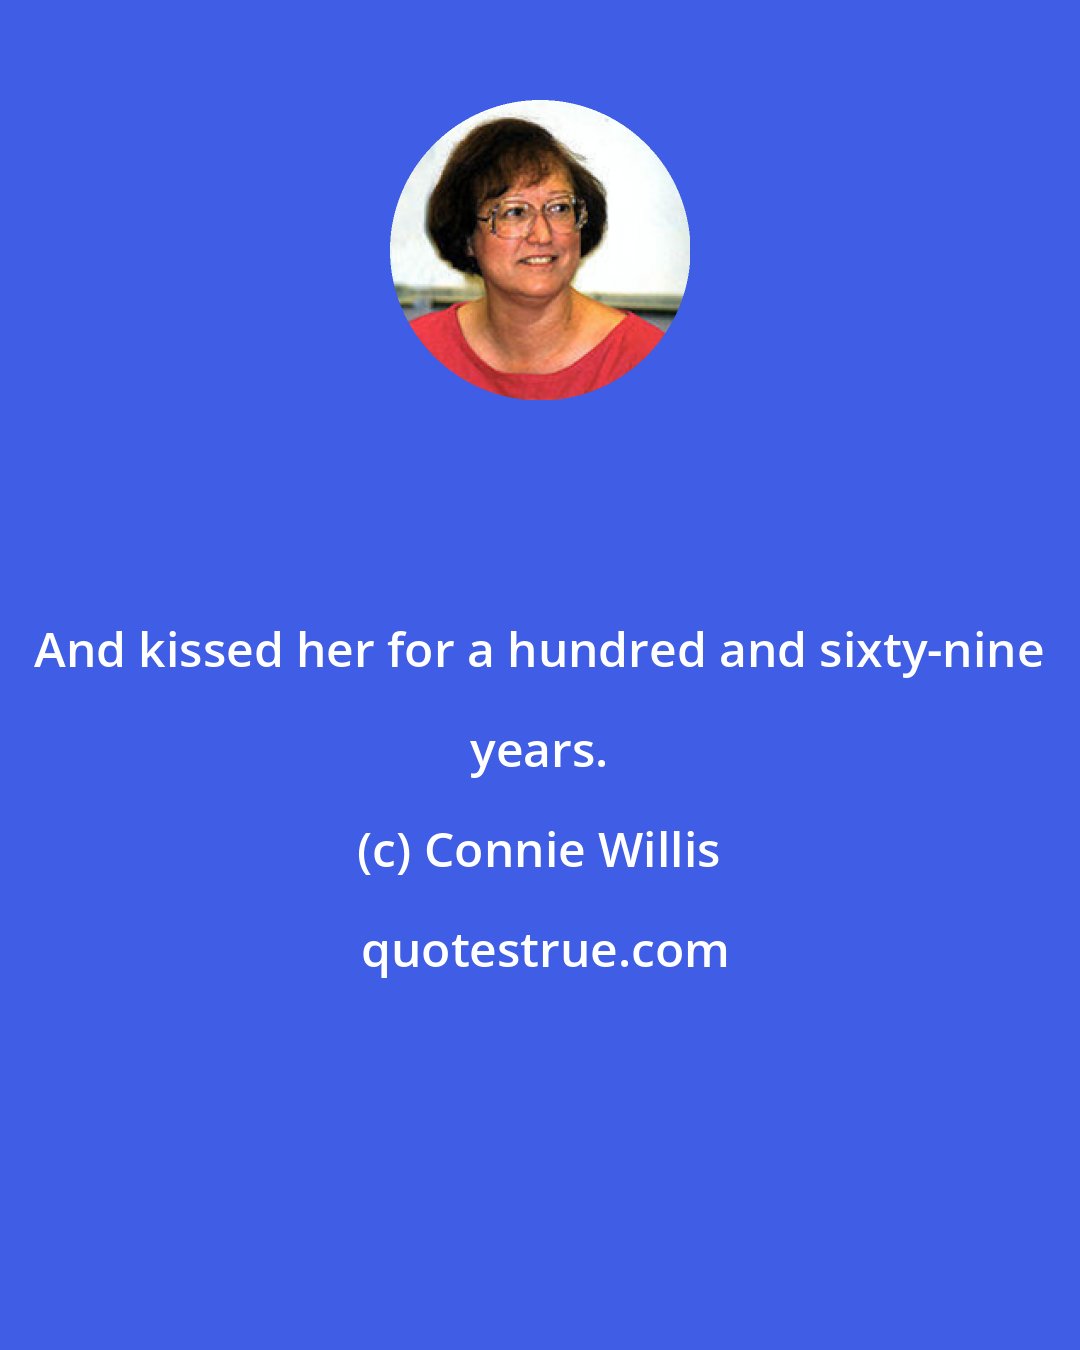 Connie Willis: And kissed her for a hundred and sixty-nine years.